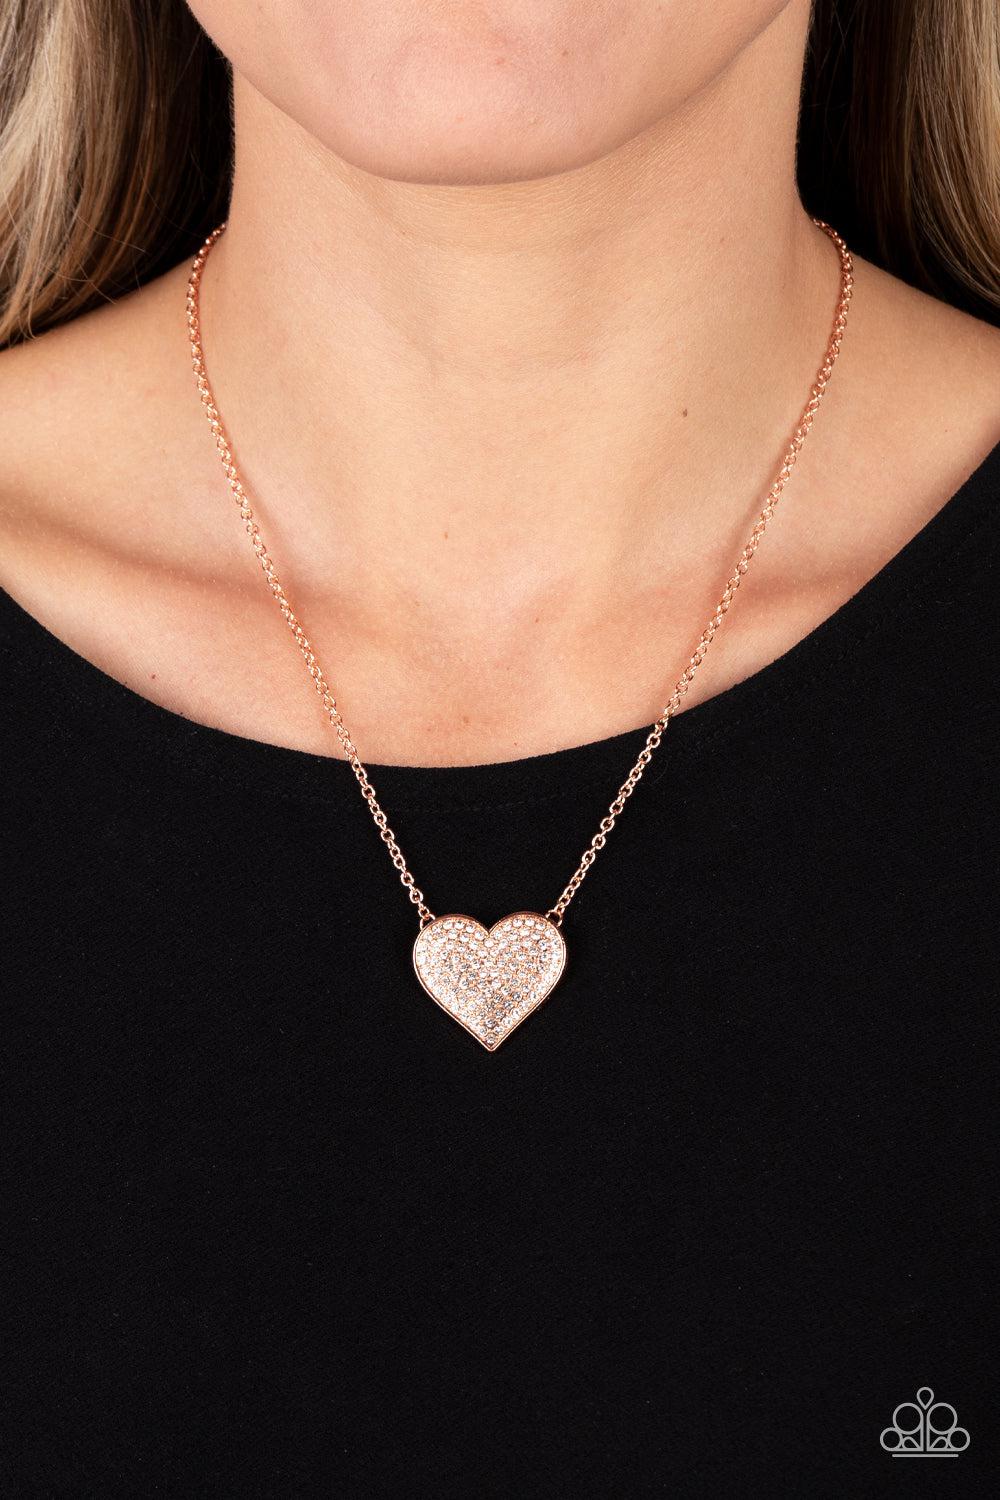 Spellbinding Sweetheart Copper &amp; White Rhinestone Heart Necklace - Paparazzi Accessories-on model - CarasShop.com - $5 Jewelry by Cara Jewels